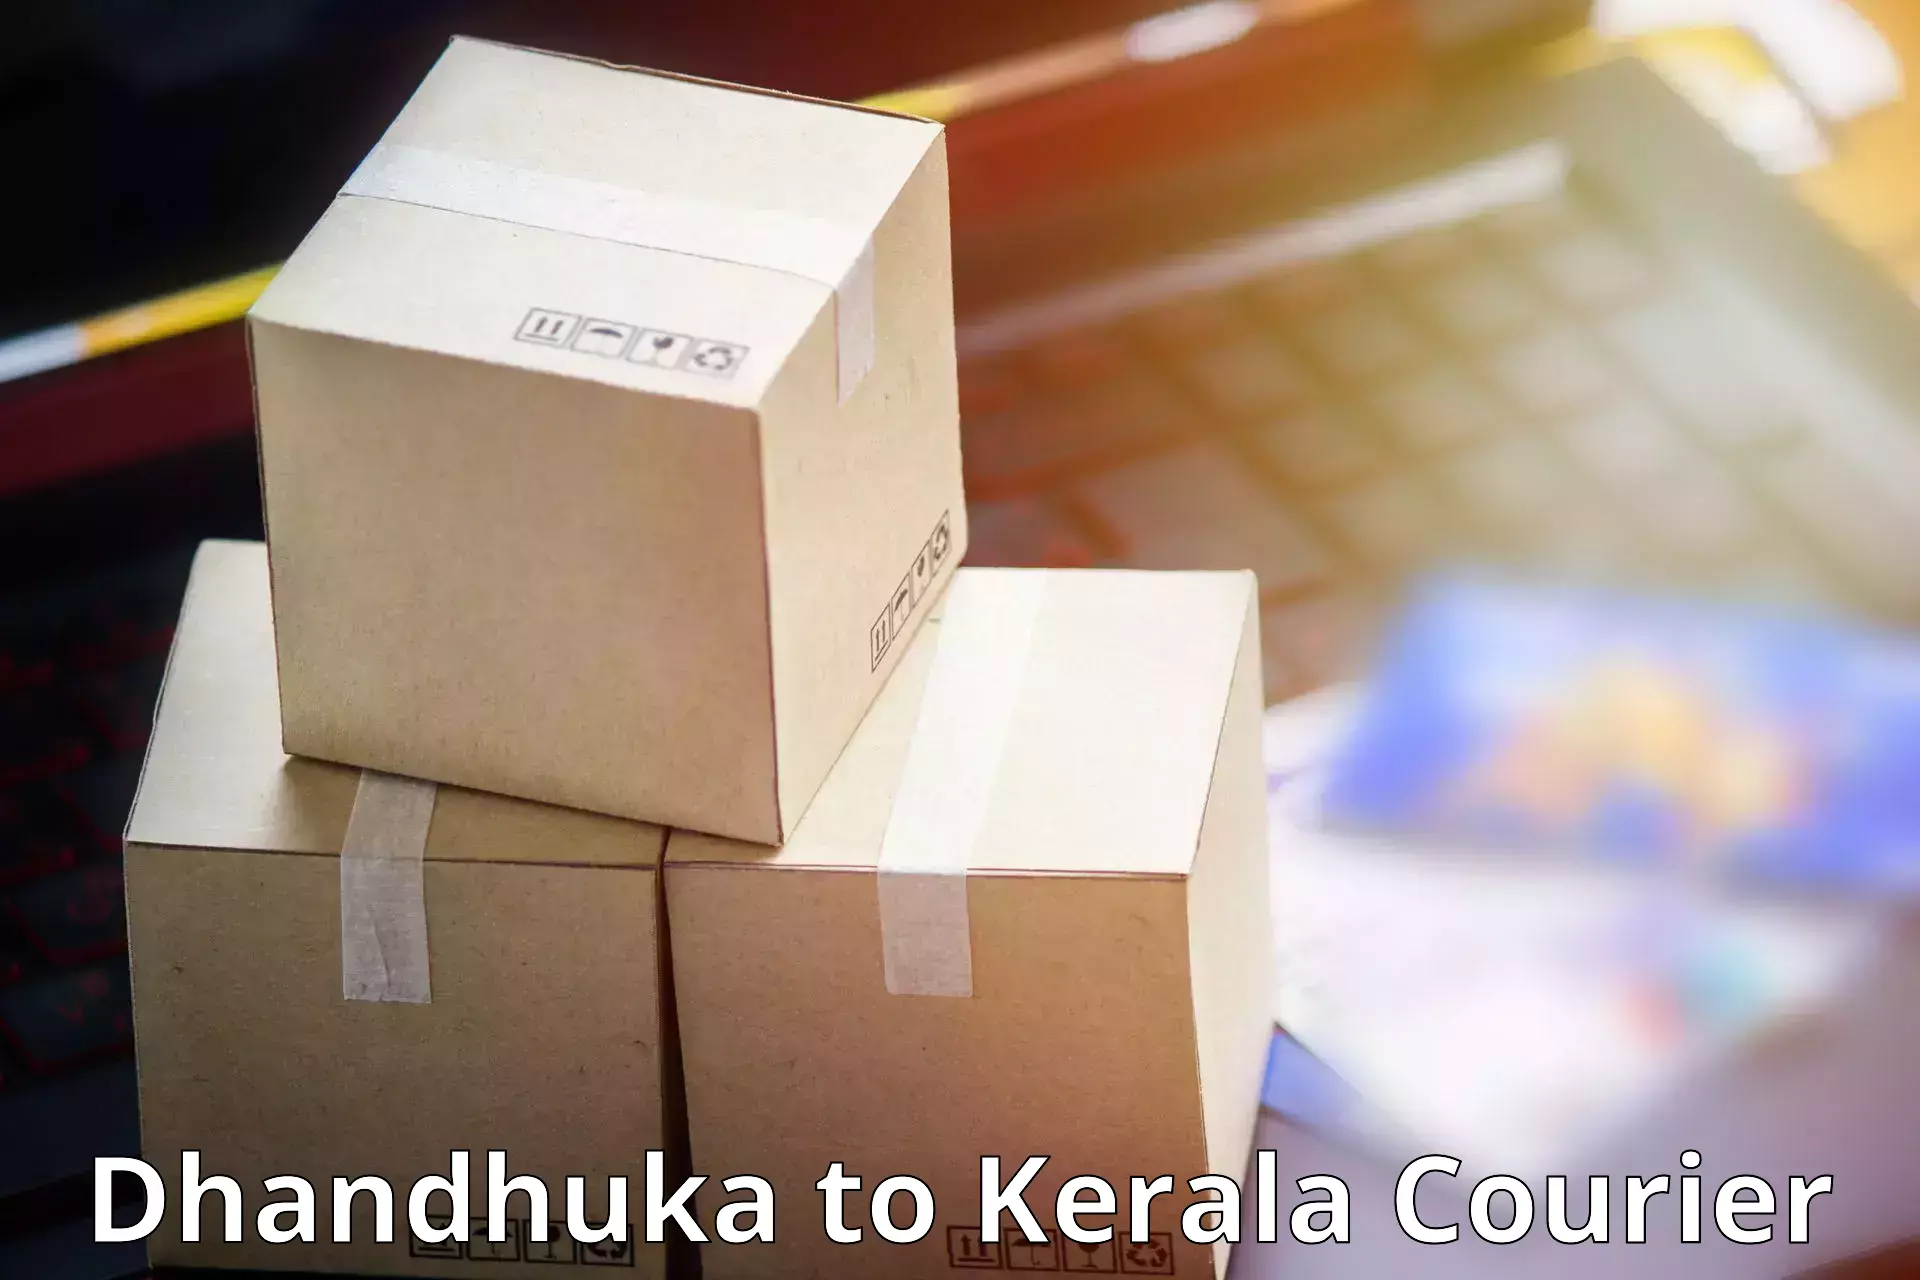 Next-generation courier services Dhandhuka to Cochin University of Science and Technology